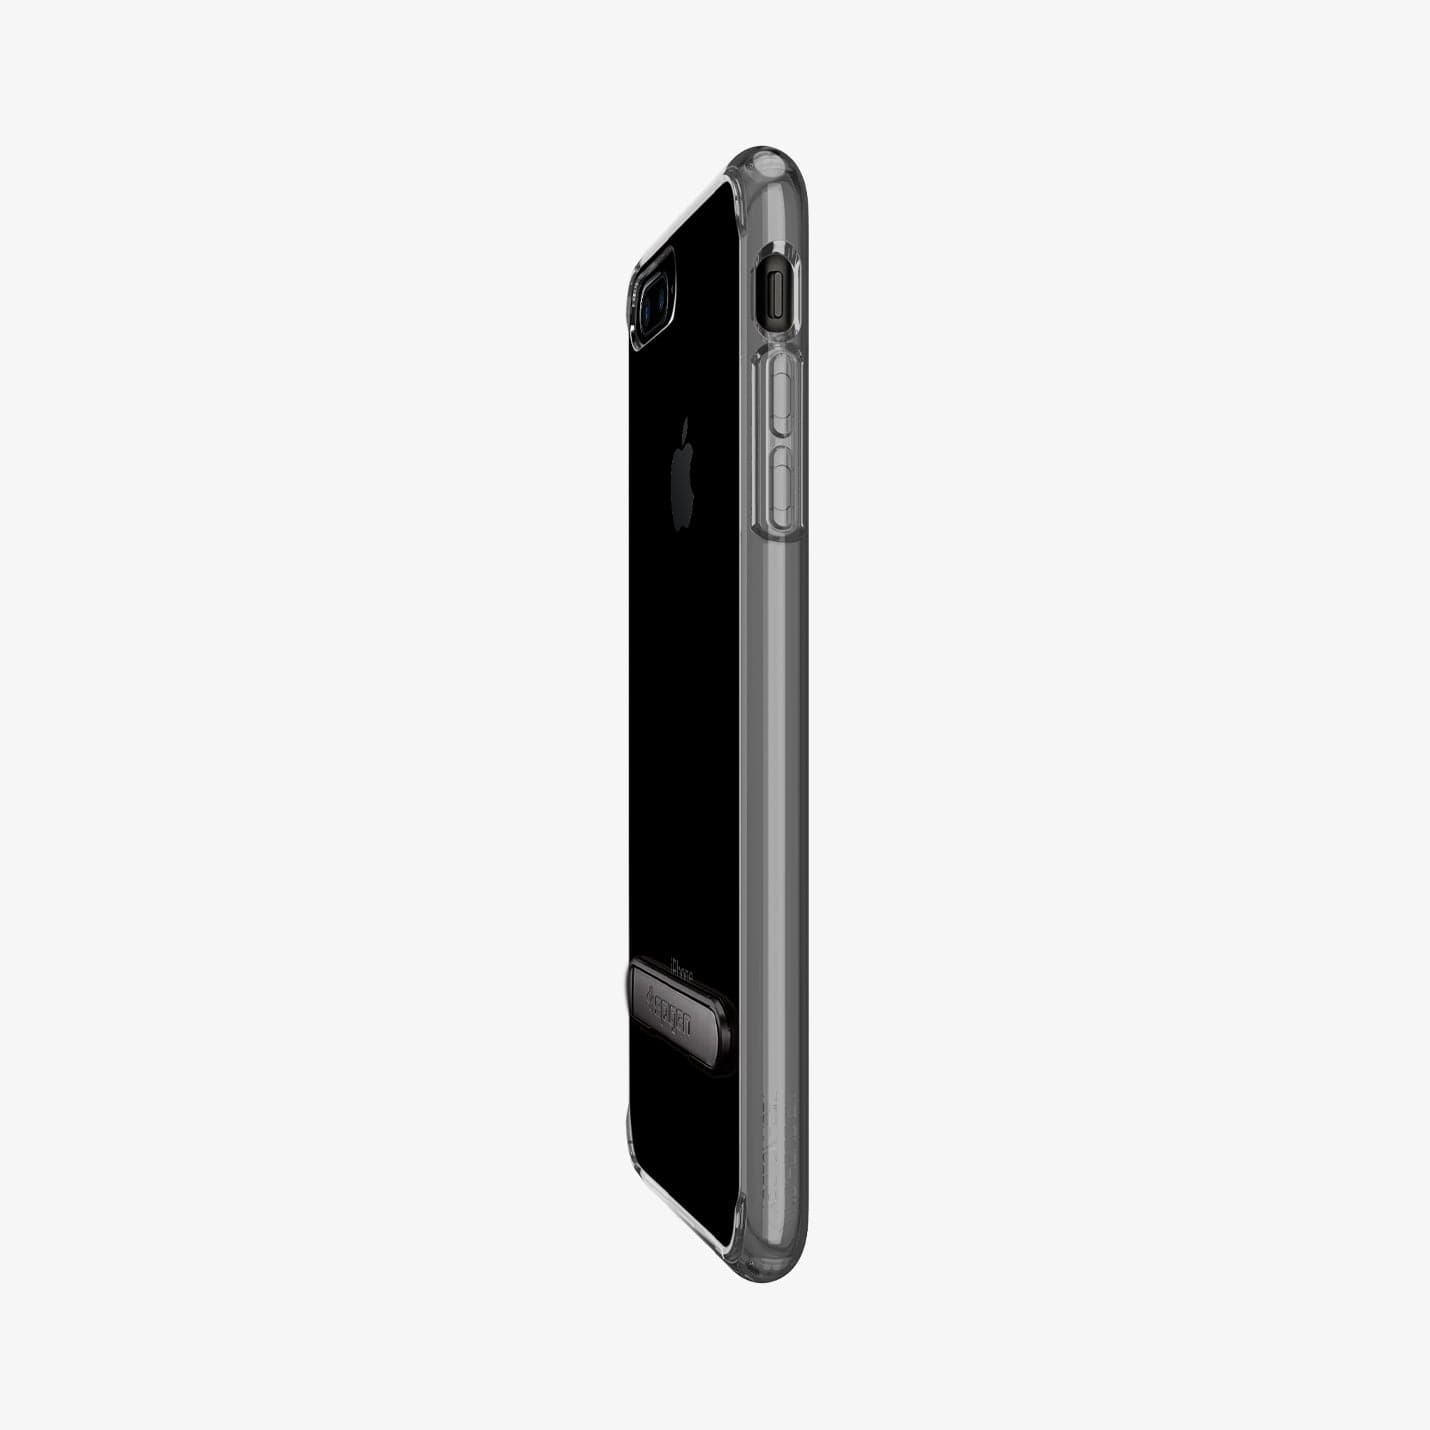 043CS20848 - iPhone 7 Series Ultra Hybrid S Case in Jet Black showing the side, partial back